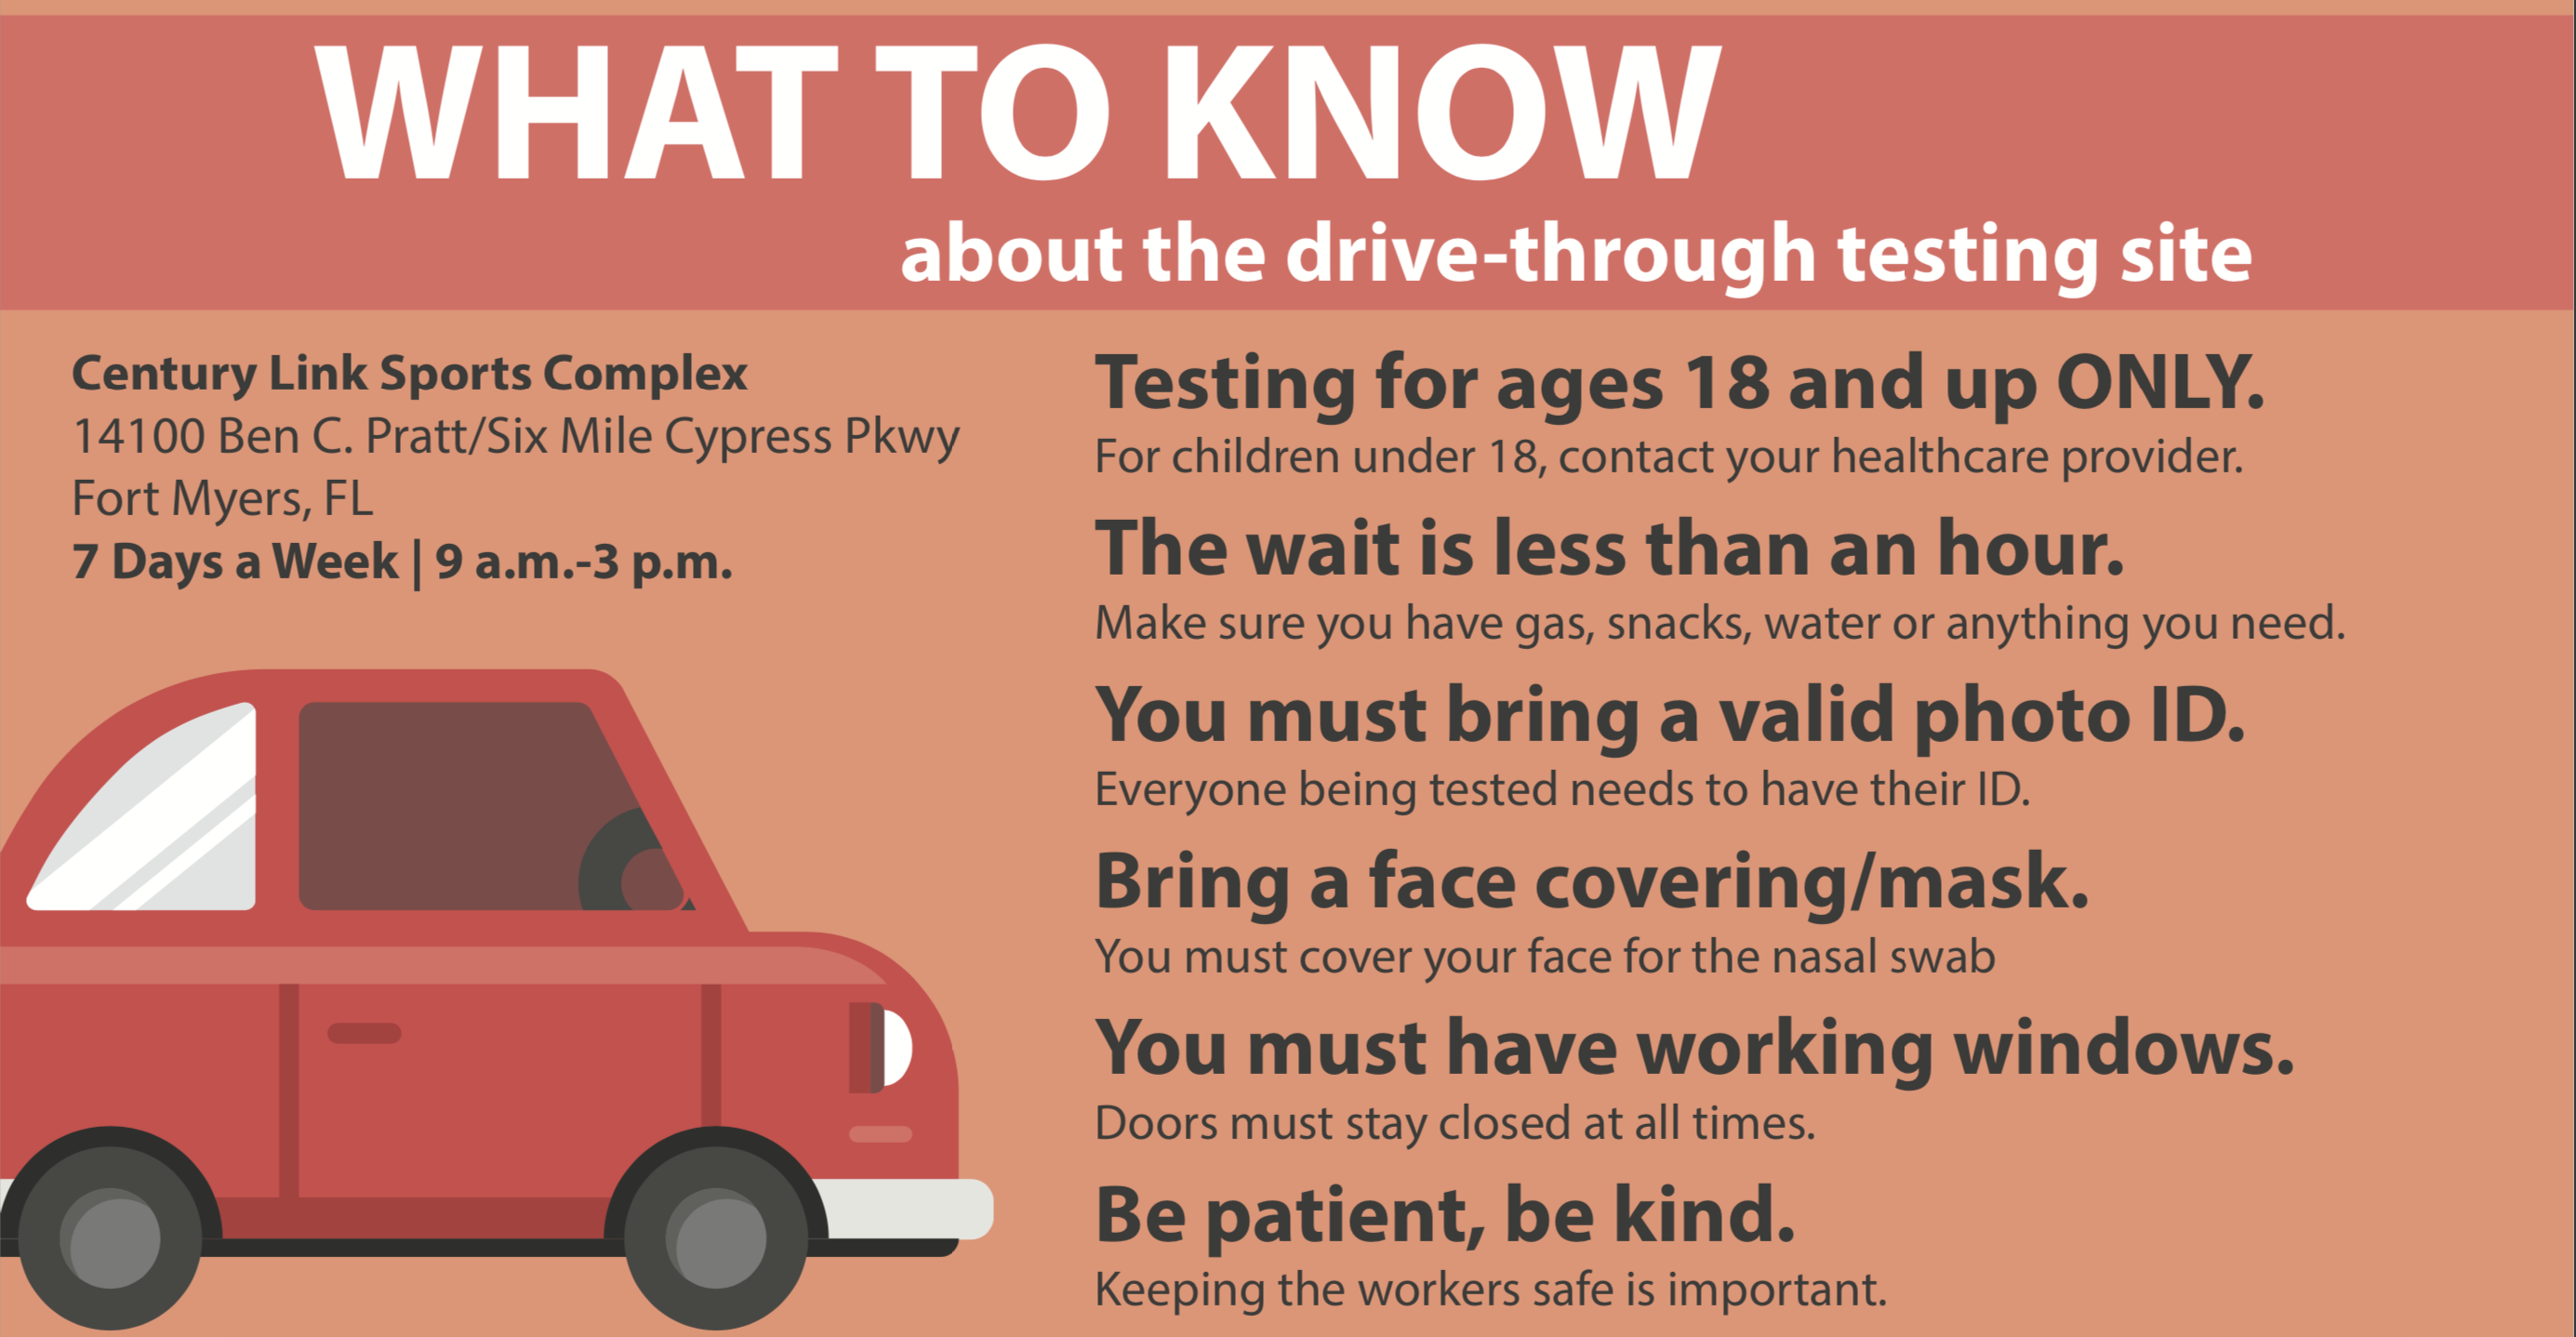 What to know about the drive-through testing site